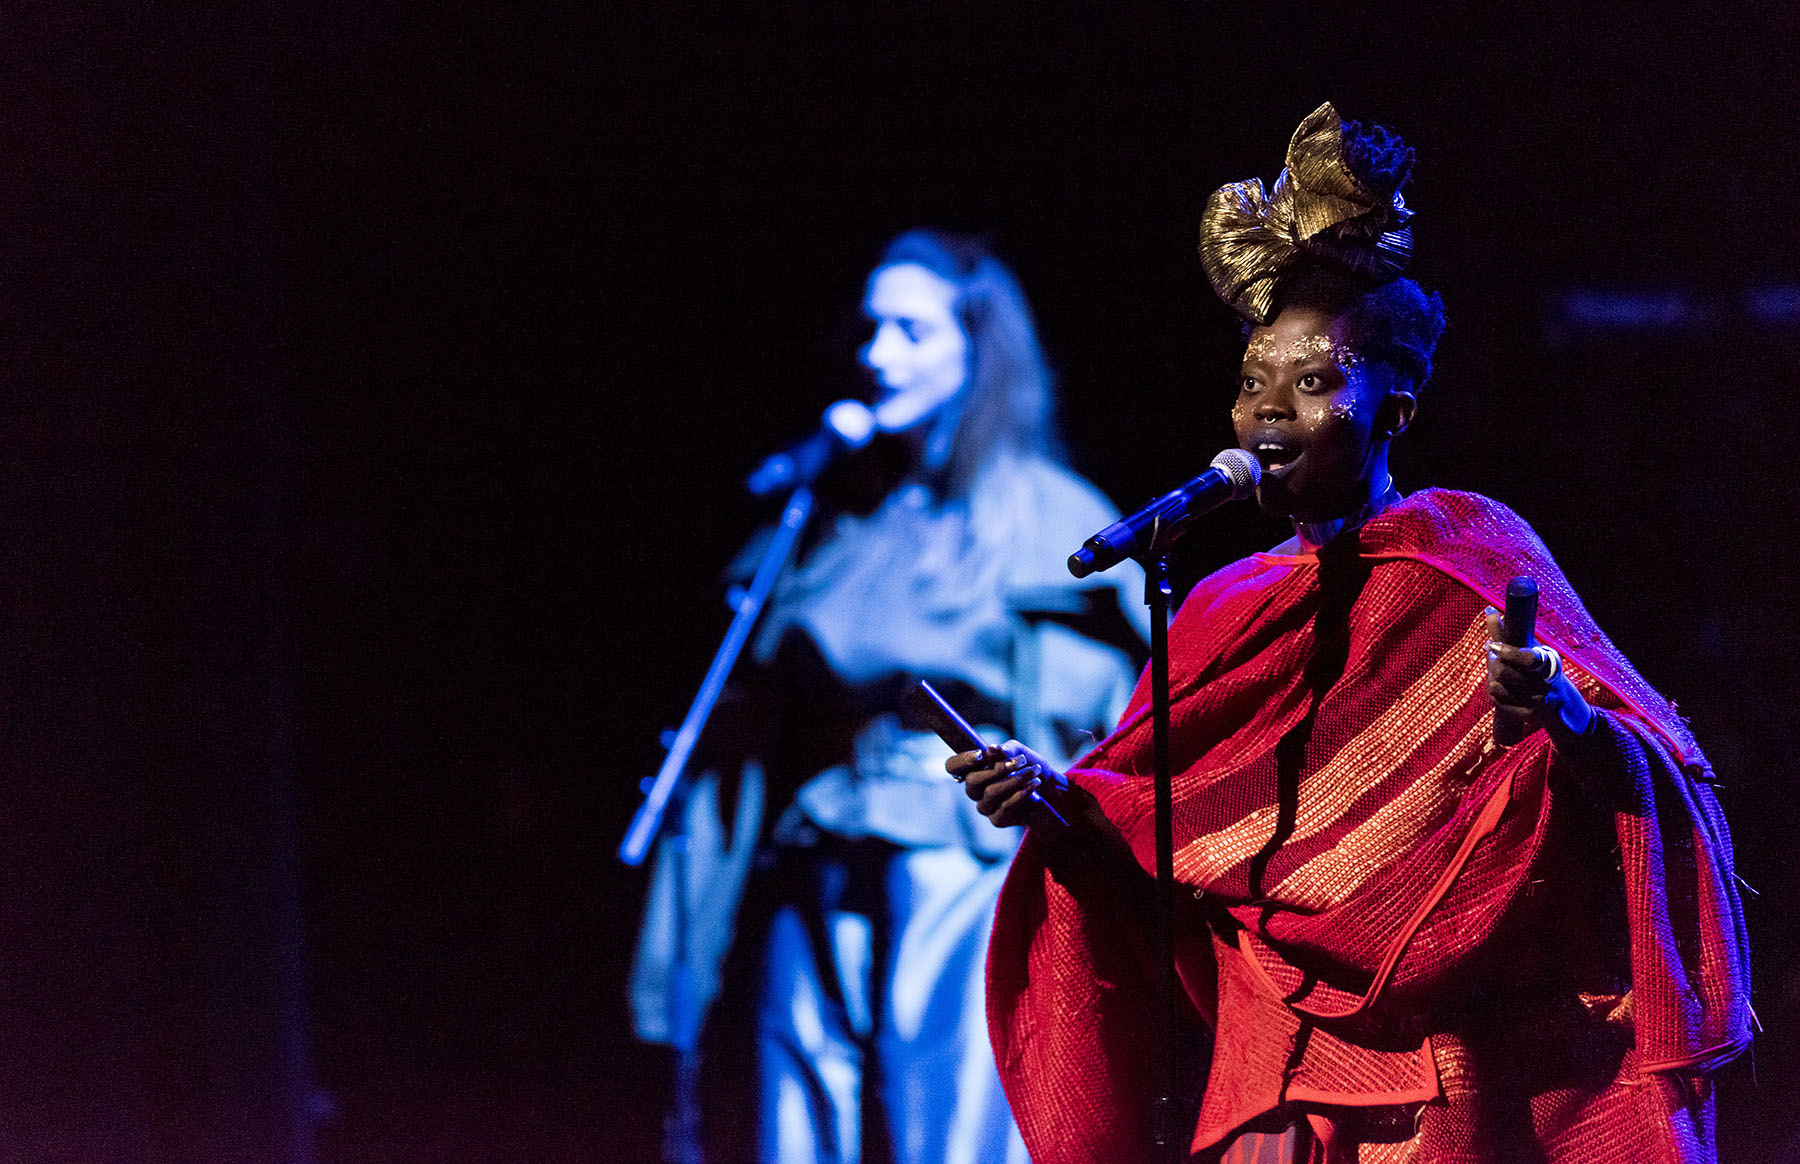 Ghanaian afrobeat and jazz singer-songwriter Jojo Abot performs with her band with backup vocalist Abbie Richards (left rear) at the fourth annual 'Africa Now!' presented by the Apollo Theater and World Music Institute at the Apollo Theater, New York, New York, Saturday, March 26, 2016. CREDIT: Photograph © 2016 Jack Vartoogian/FrontRowPhotos. ALL RIGHTS RESERVED.